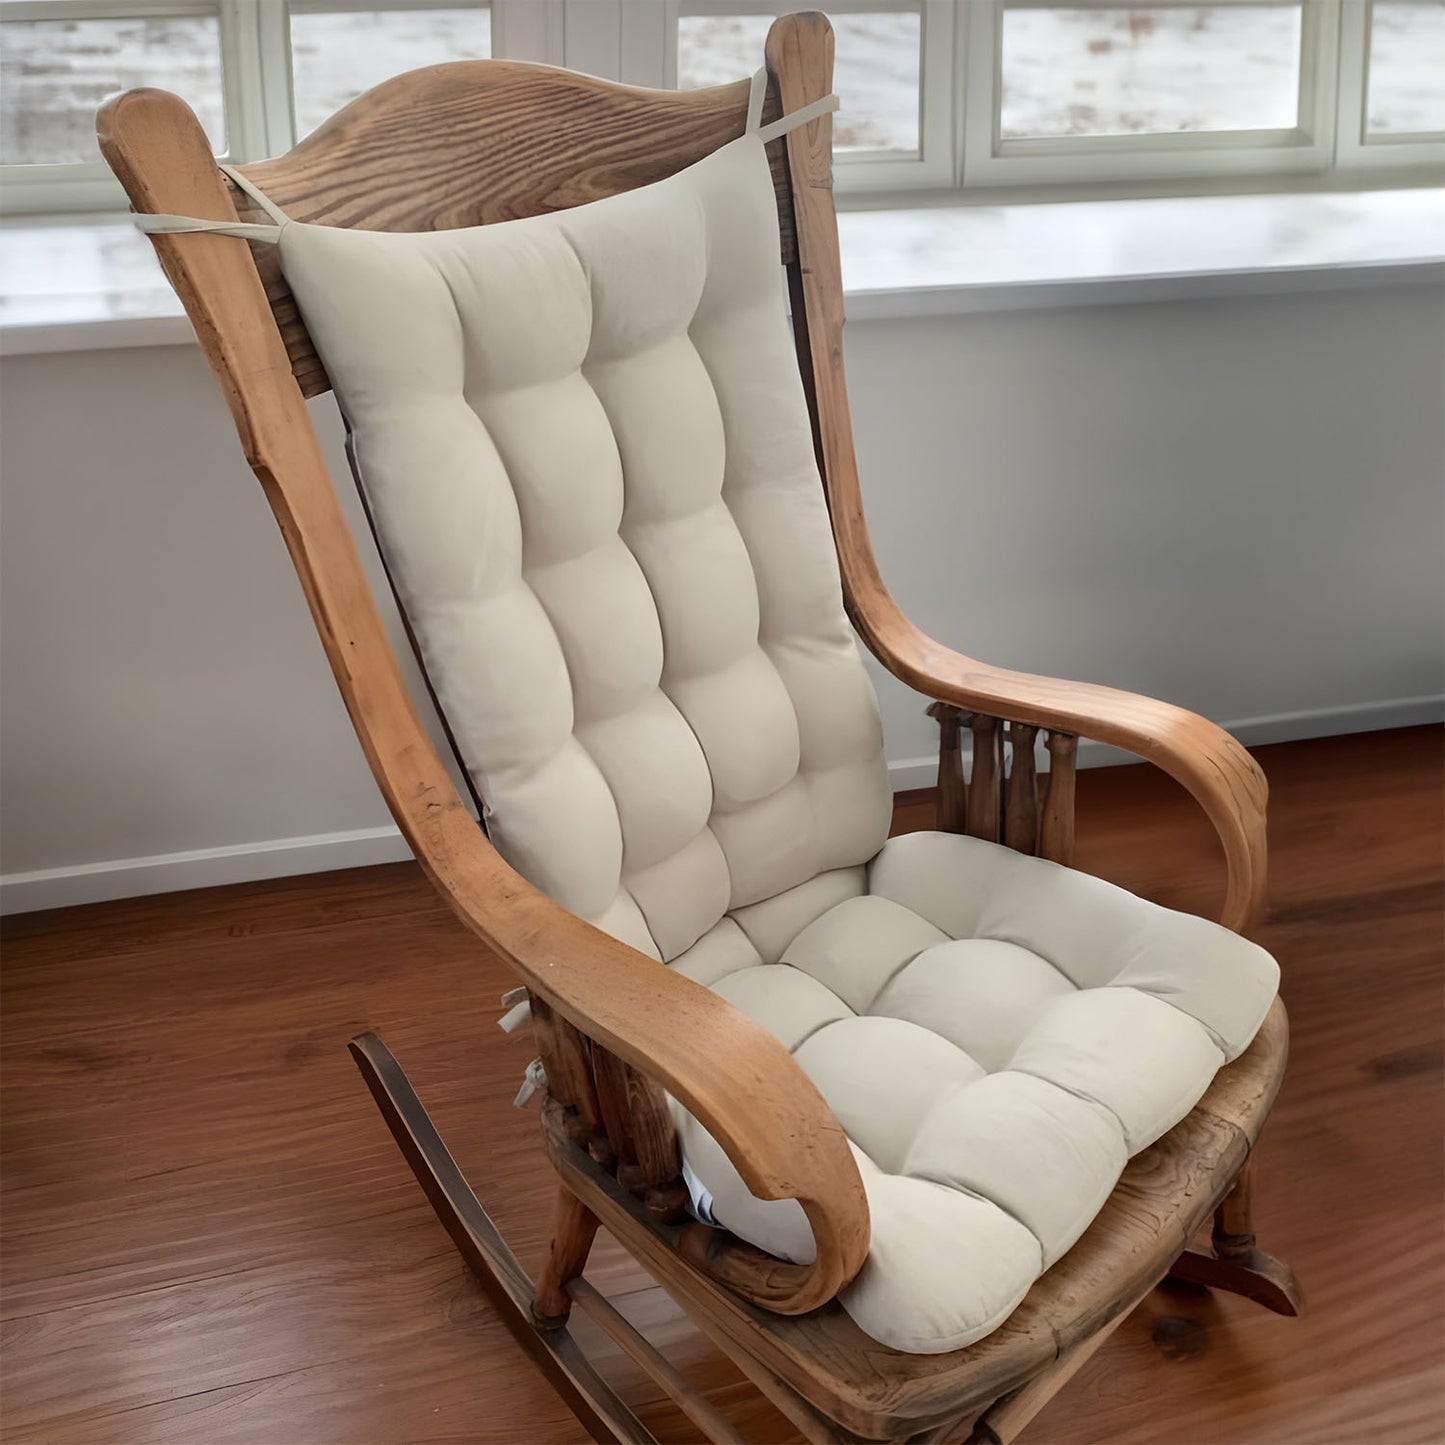 light colored rocking chair cushions in a contemporary decor style on a wood rocker